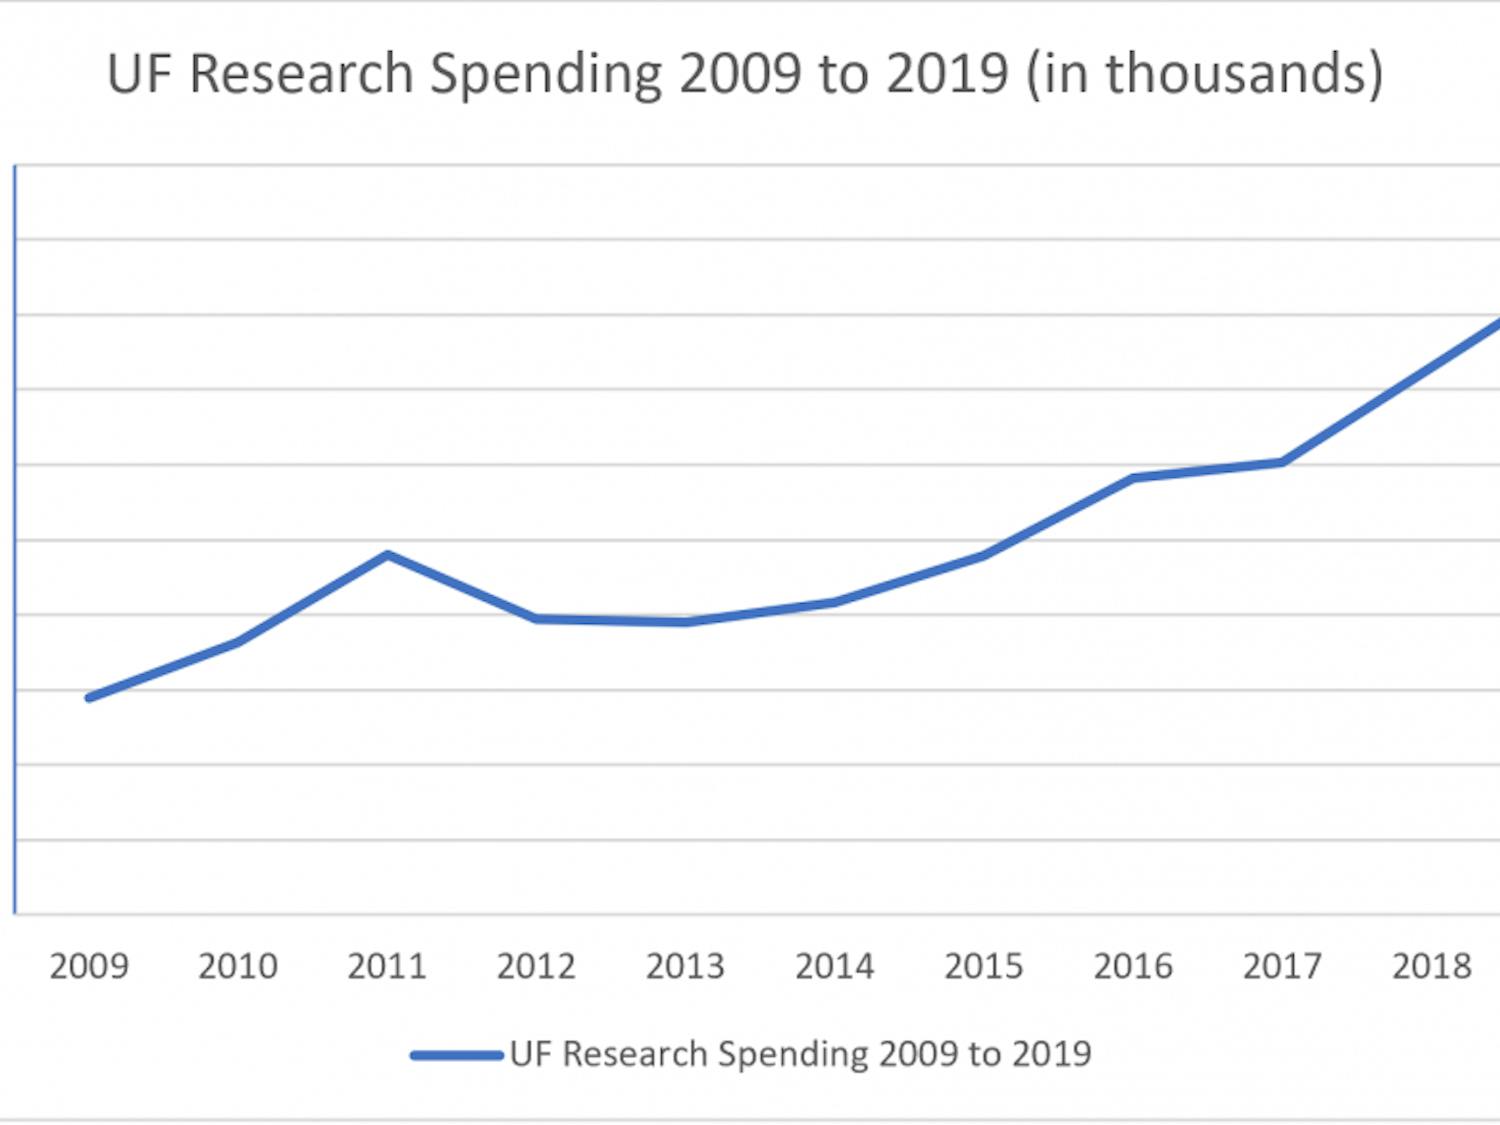 Research spending has increased gradually over the years at UF. In 2019, UF spent $928.6 million in research spending.